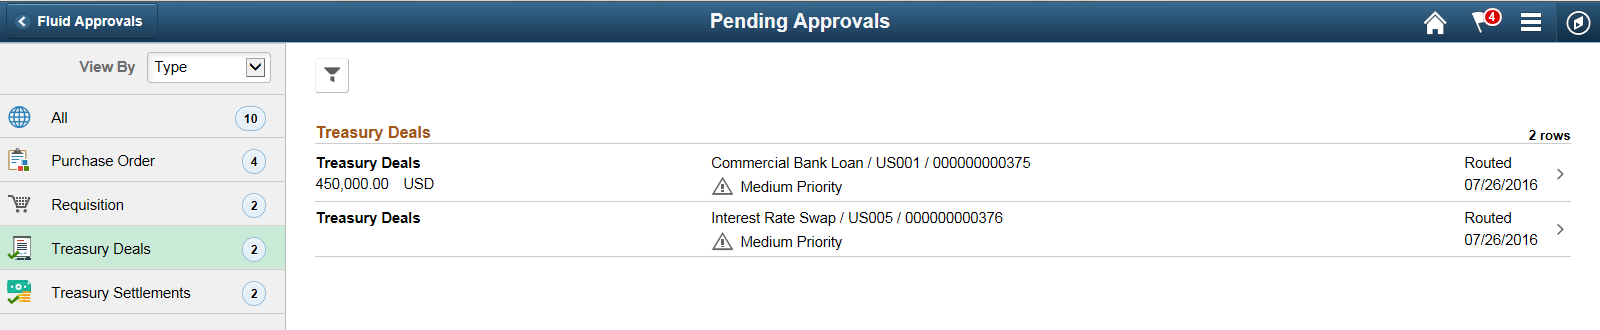 Treasury Deals - Pending Approvals page (LFF)